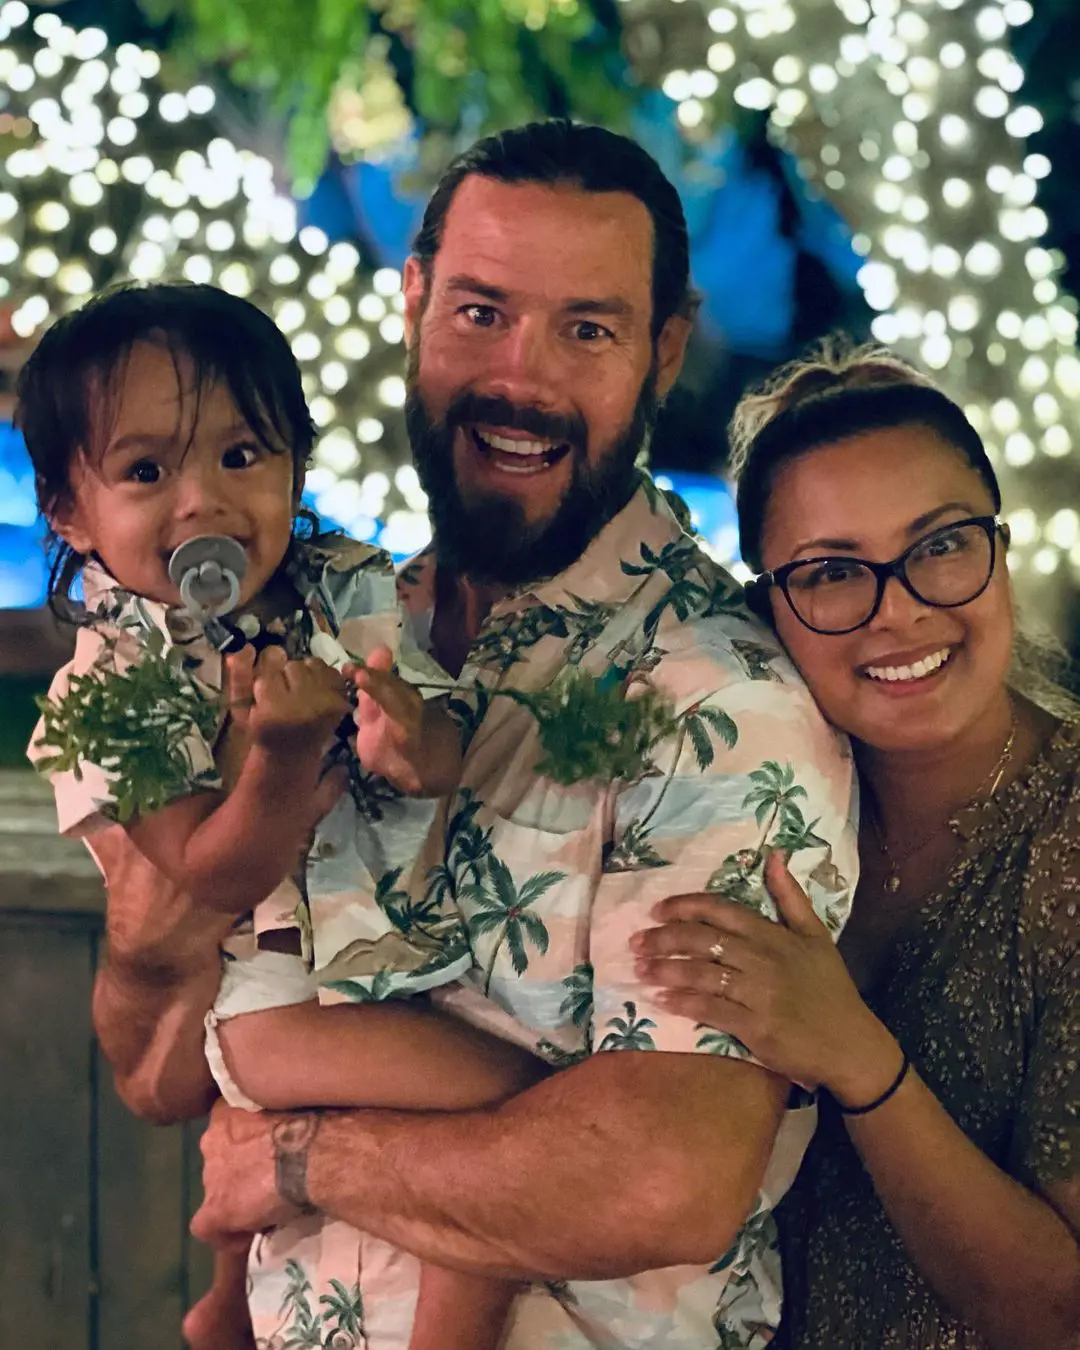 Chris celebrated Aloha Tuesday with his life partner Mae and son Axe on September 28, 2021.